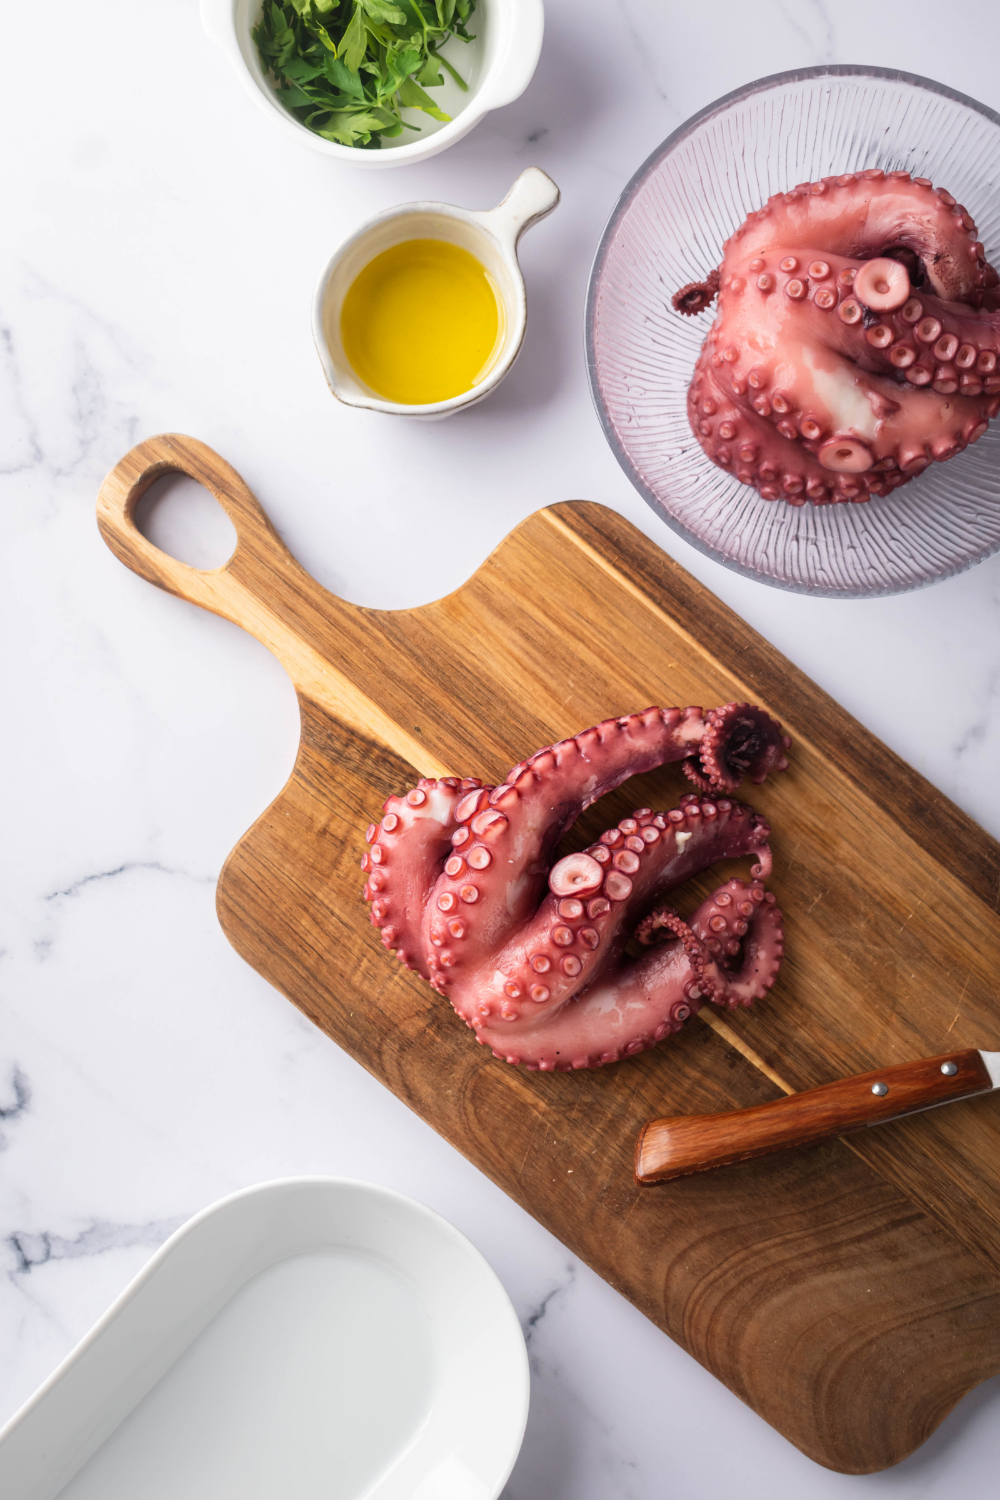 Octopus tentacles on a wooden cutting board. Behind as a glass bowl with more octopus tentacles in a bowl of melted butter next to it